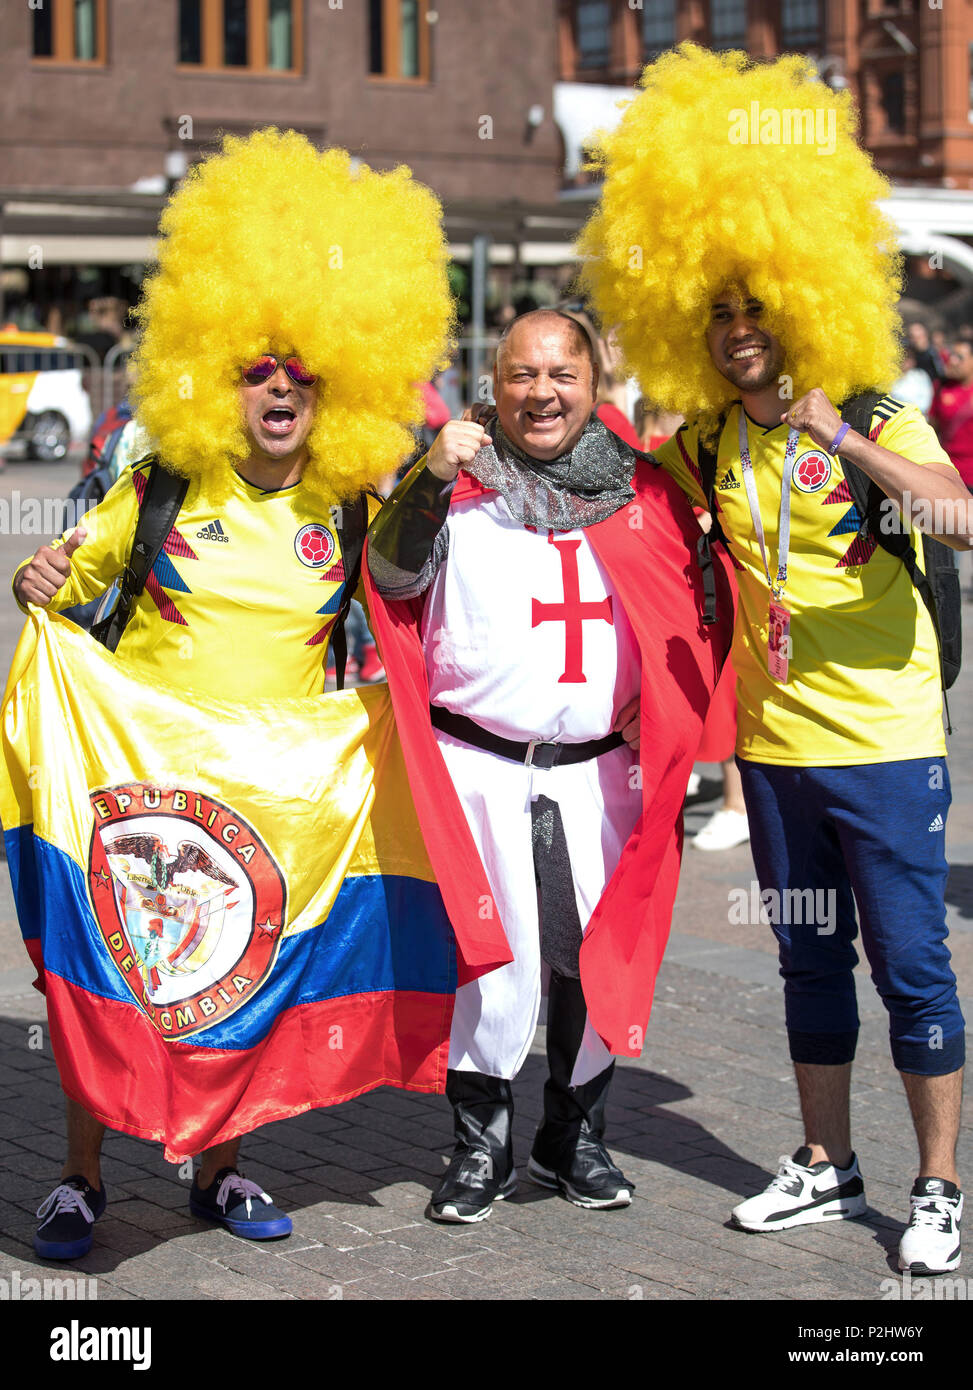 Dee Dee Murray from Luton dressed in a crusader outfit standing with Columbian football fans in Manezhnaya Square, Moscow as he arrives for the 2018 World Cup in Russia. Stock Photo